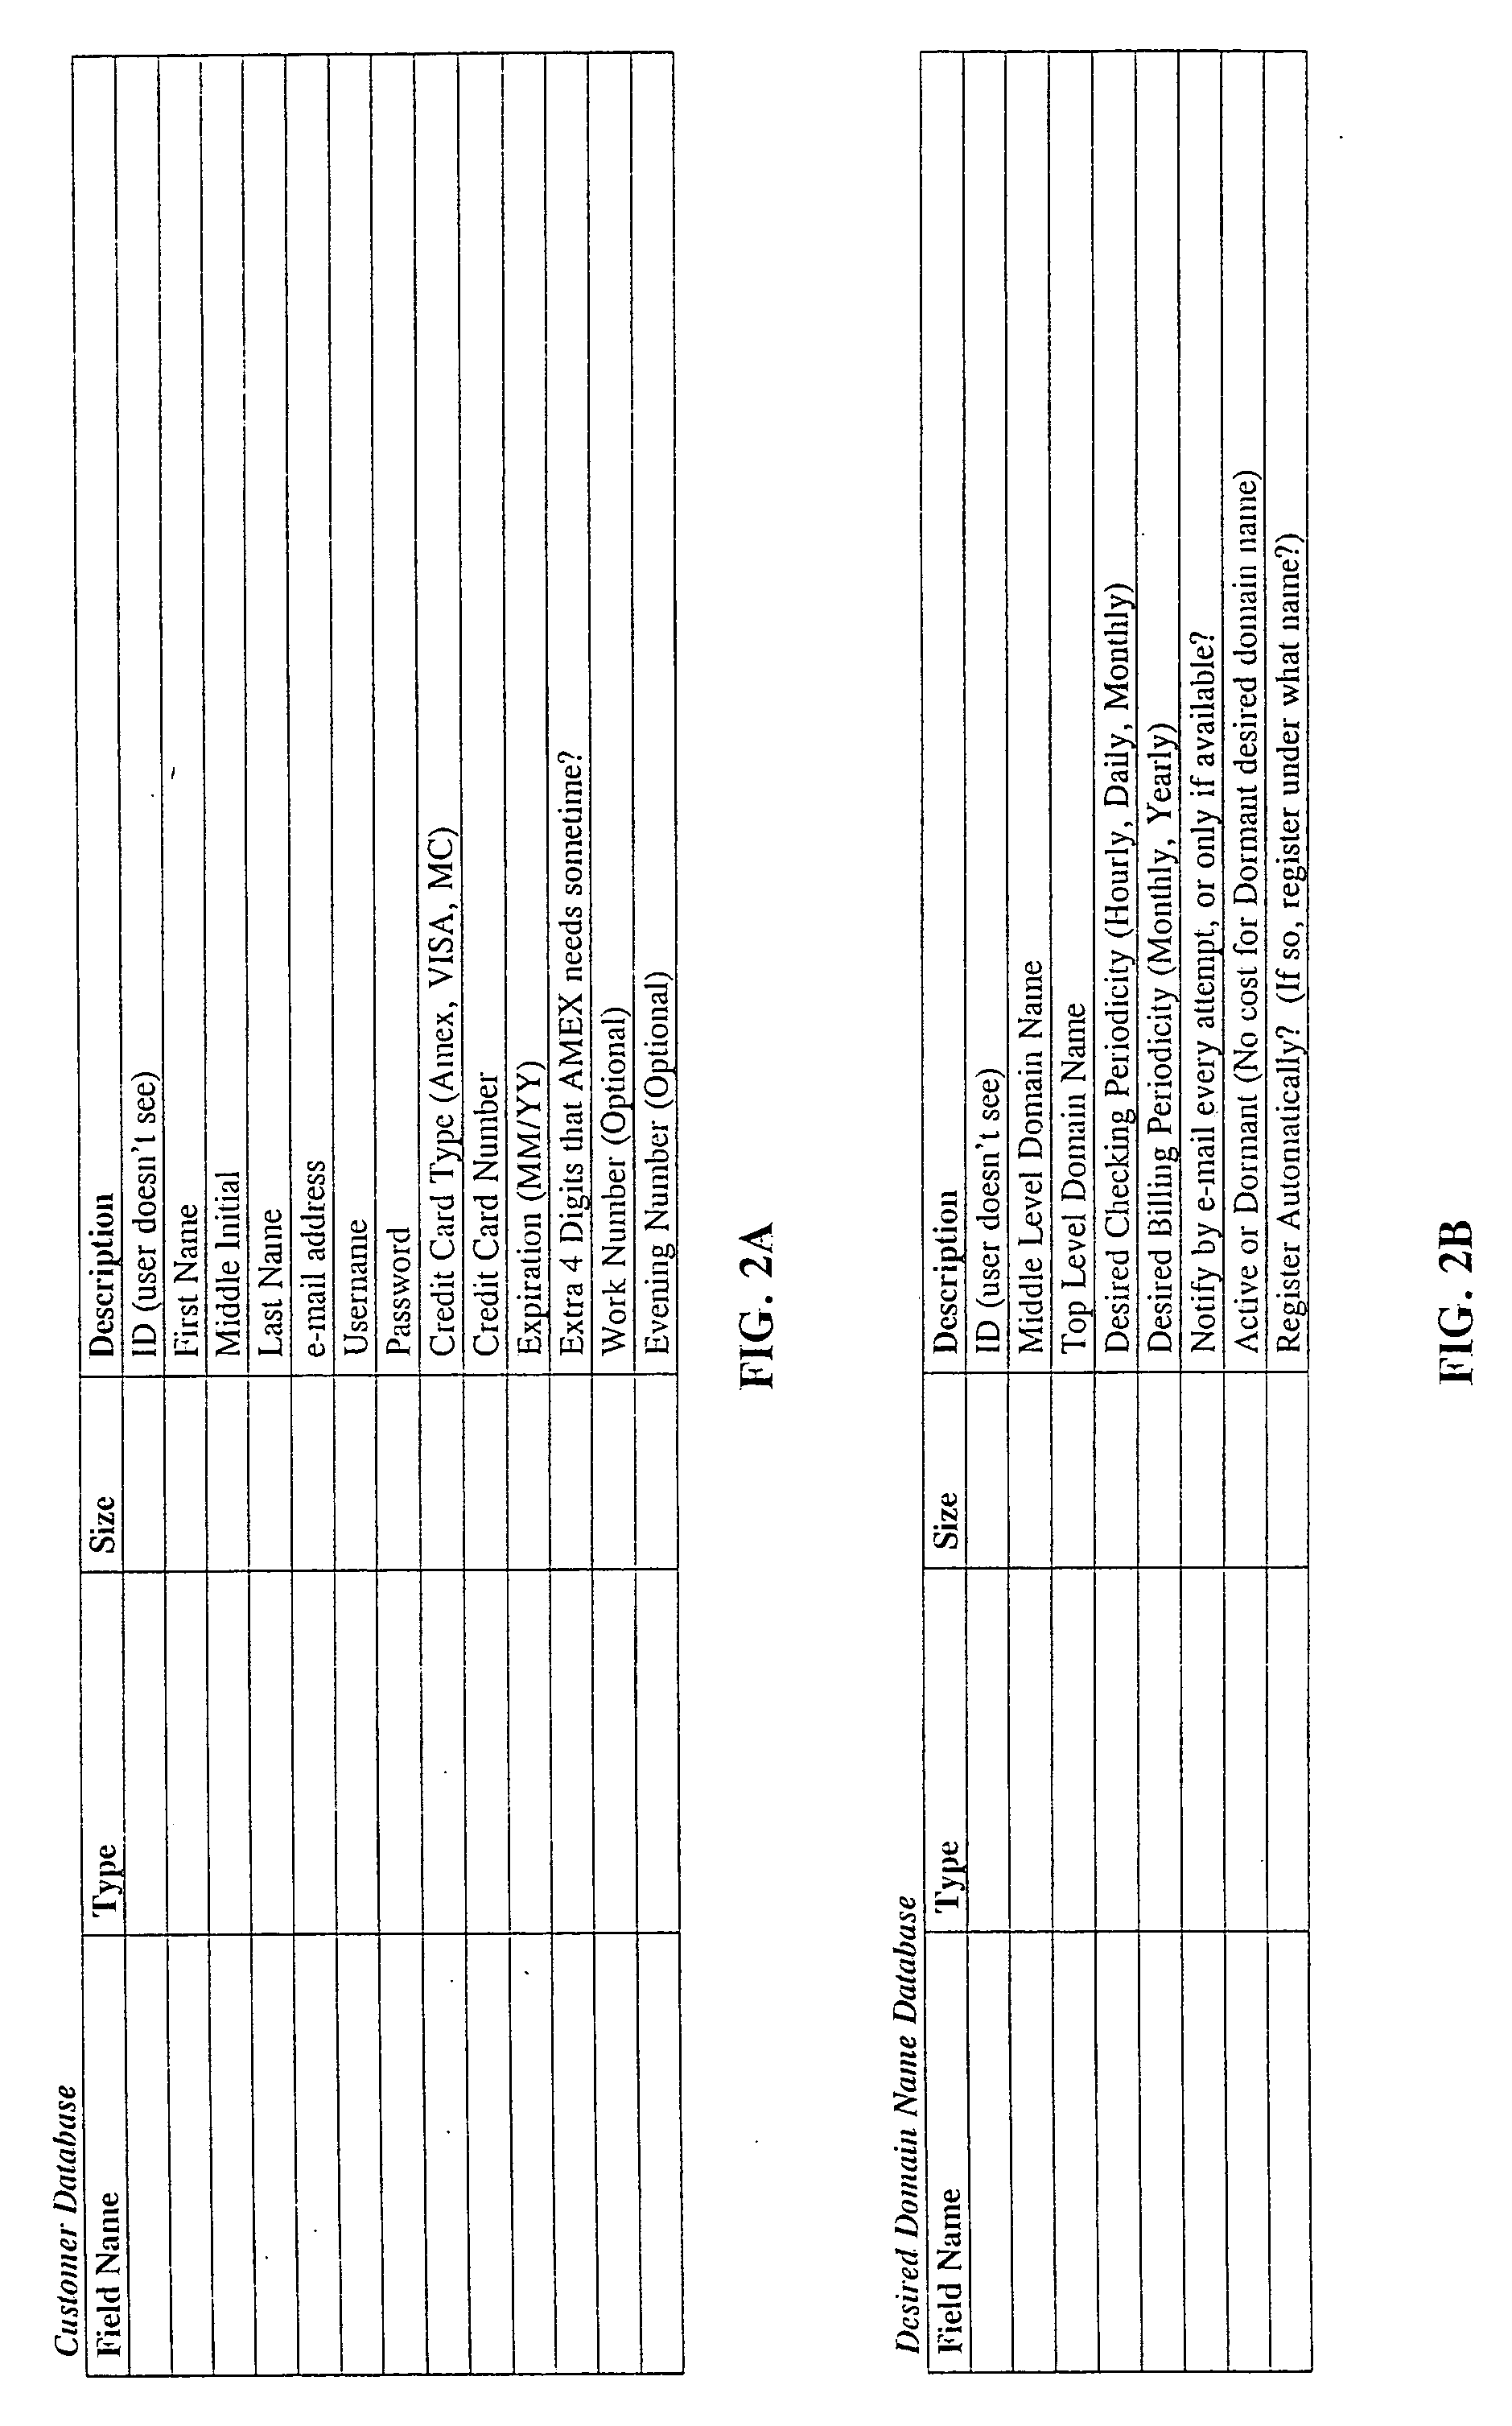 Domain name acquisition and management system and method